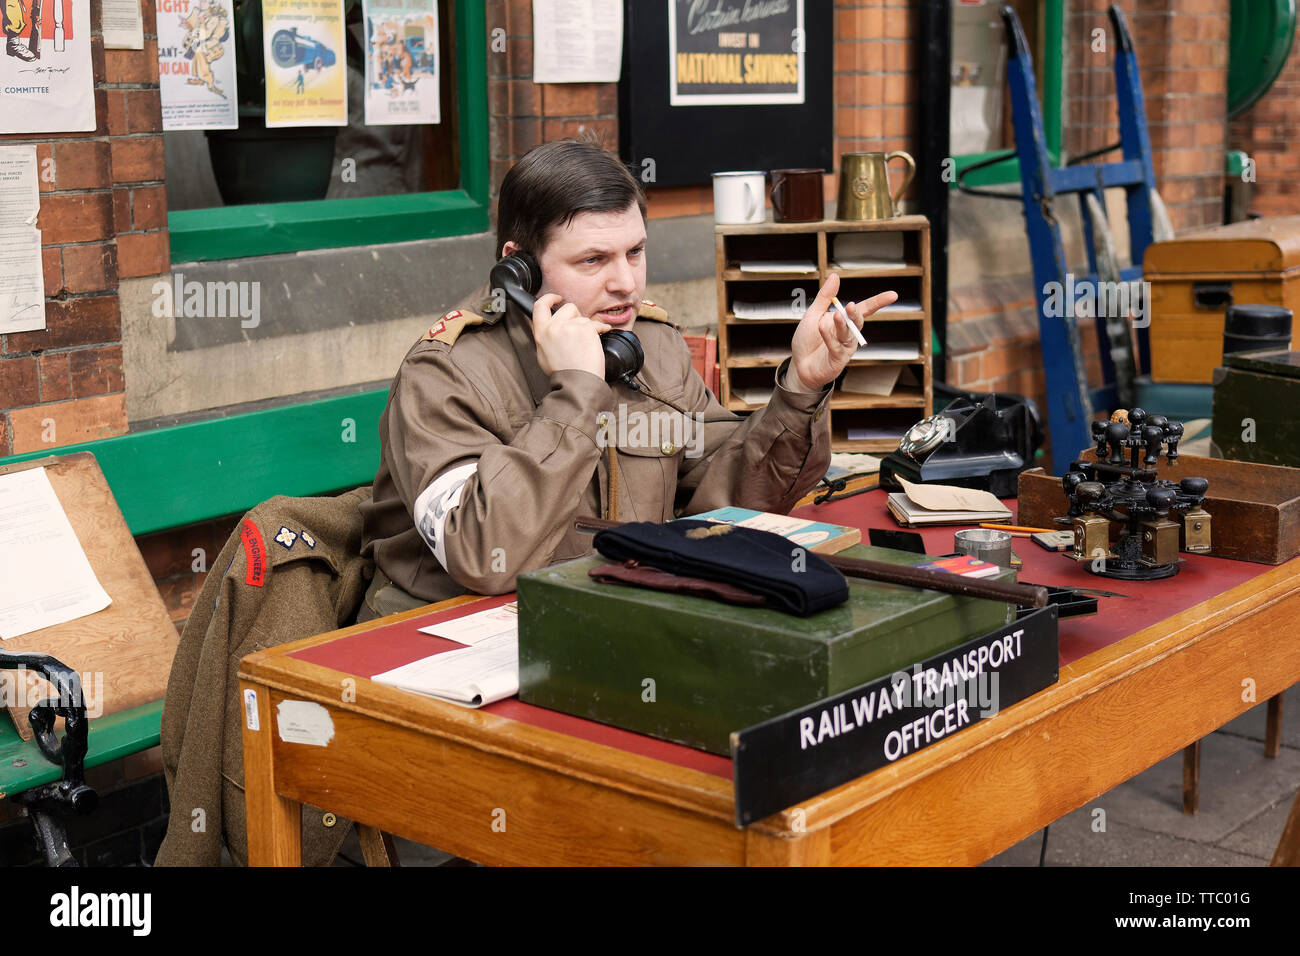 Reenactor dressed as a Railway Transport Officer from World War Two Stock Photo